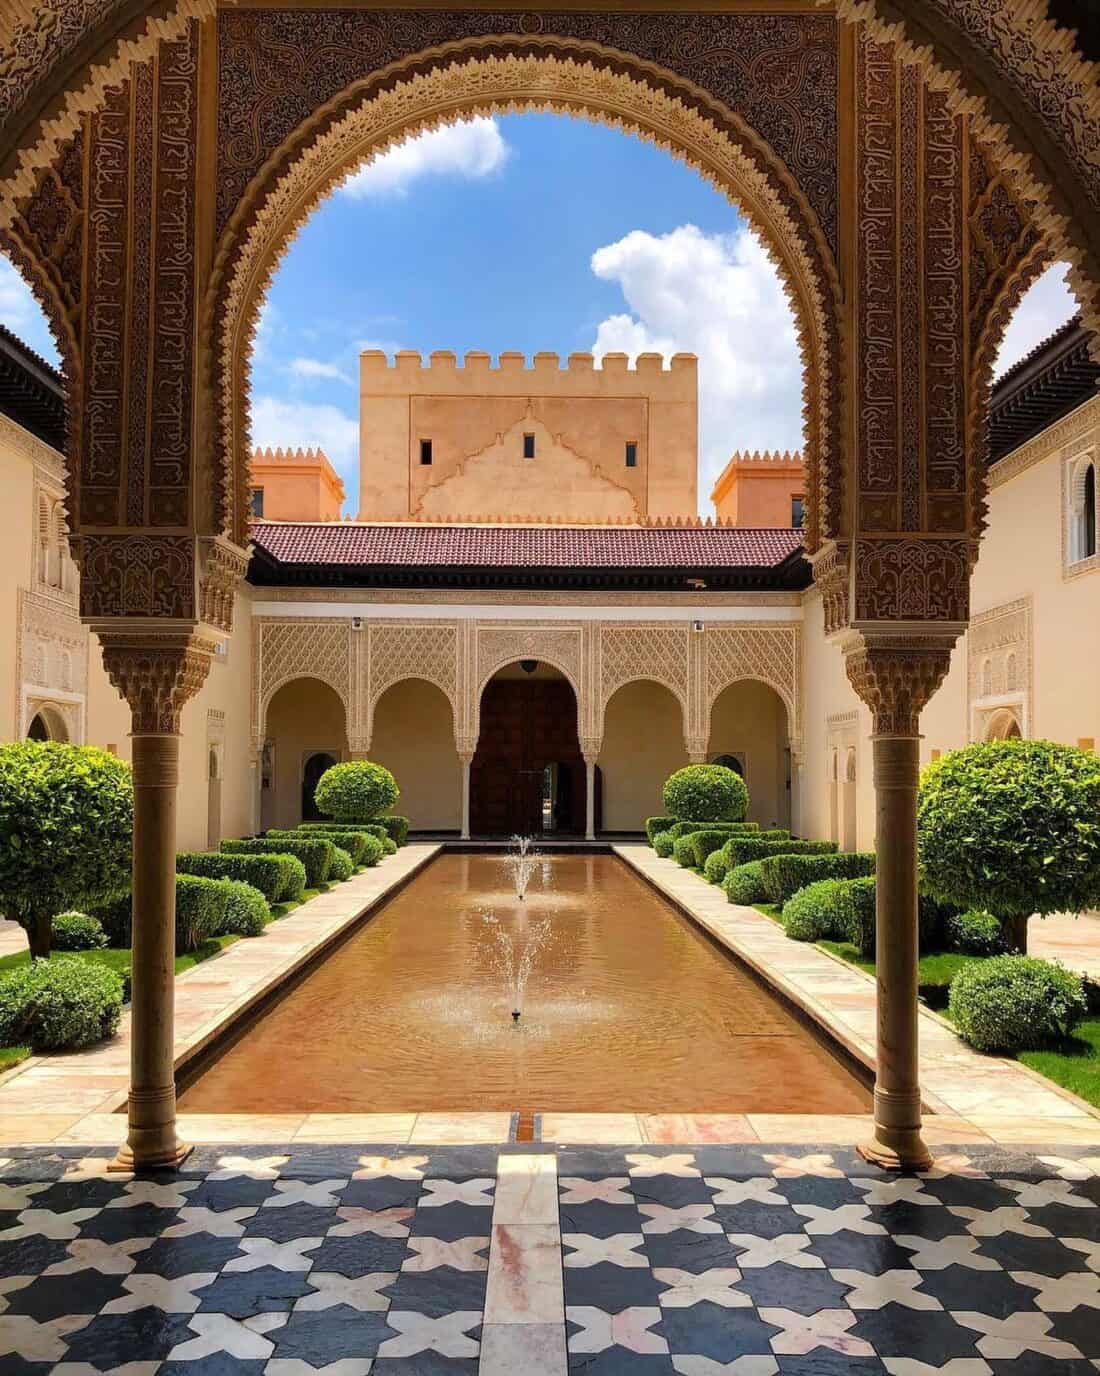 A courtyard with a fountain and arches.